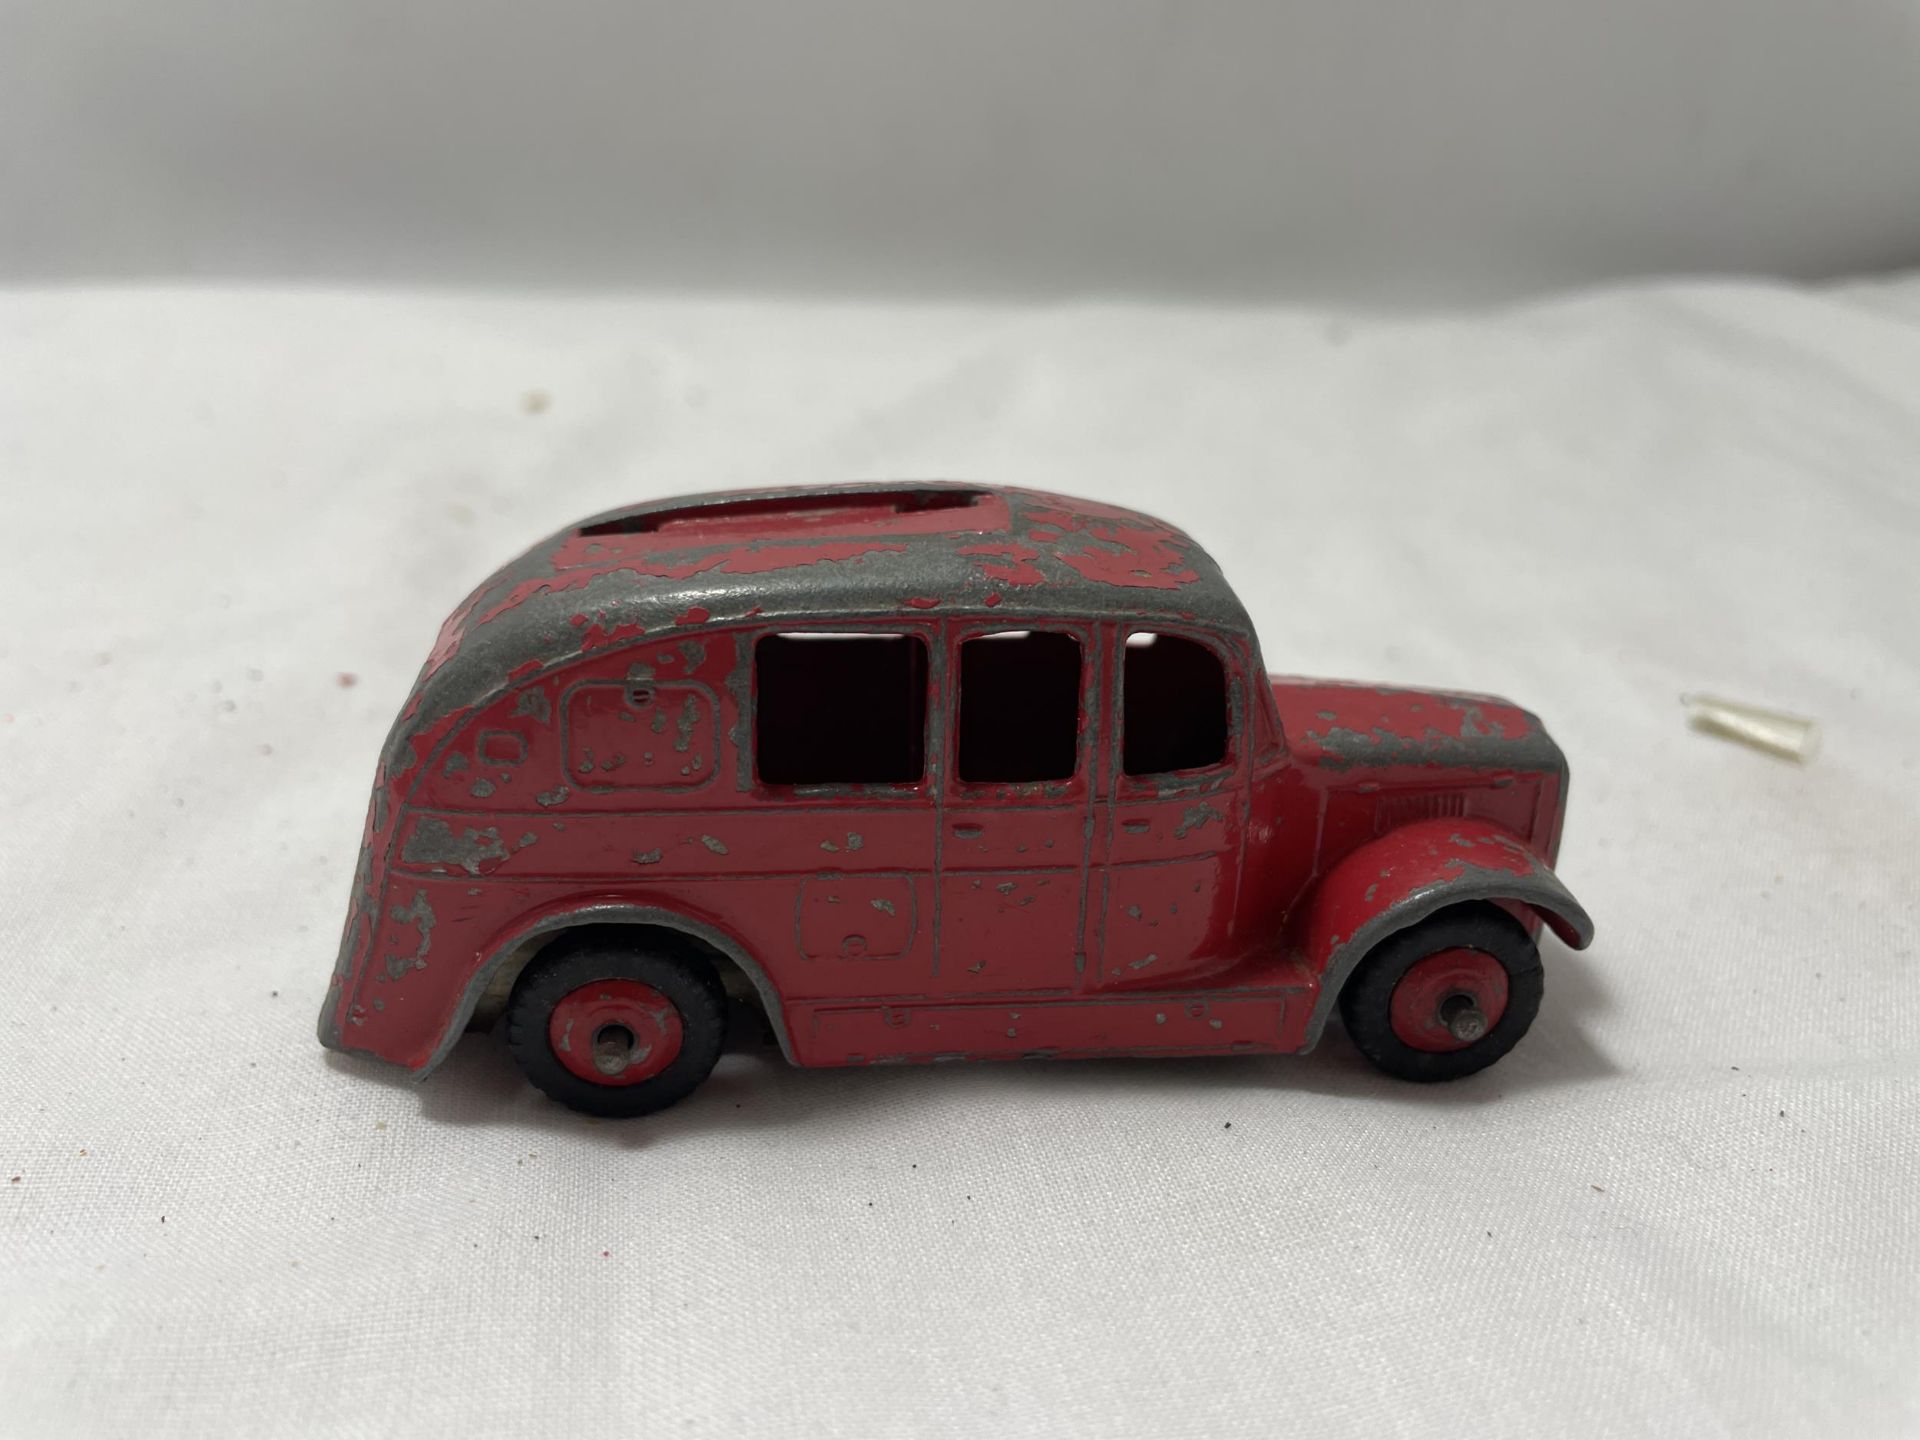 THREE VINTAGE DIE CAST DINKY VEHICLES MADE IN ENGLAND BY MECCANO TO INCLUDE A STREAMLINED FIRE - Image 4 of 5